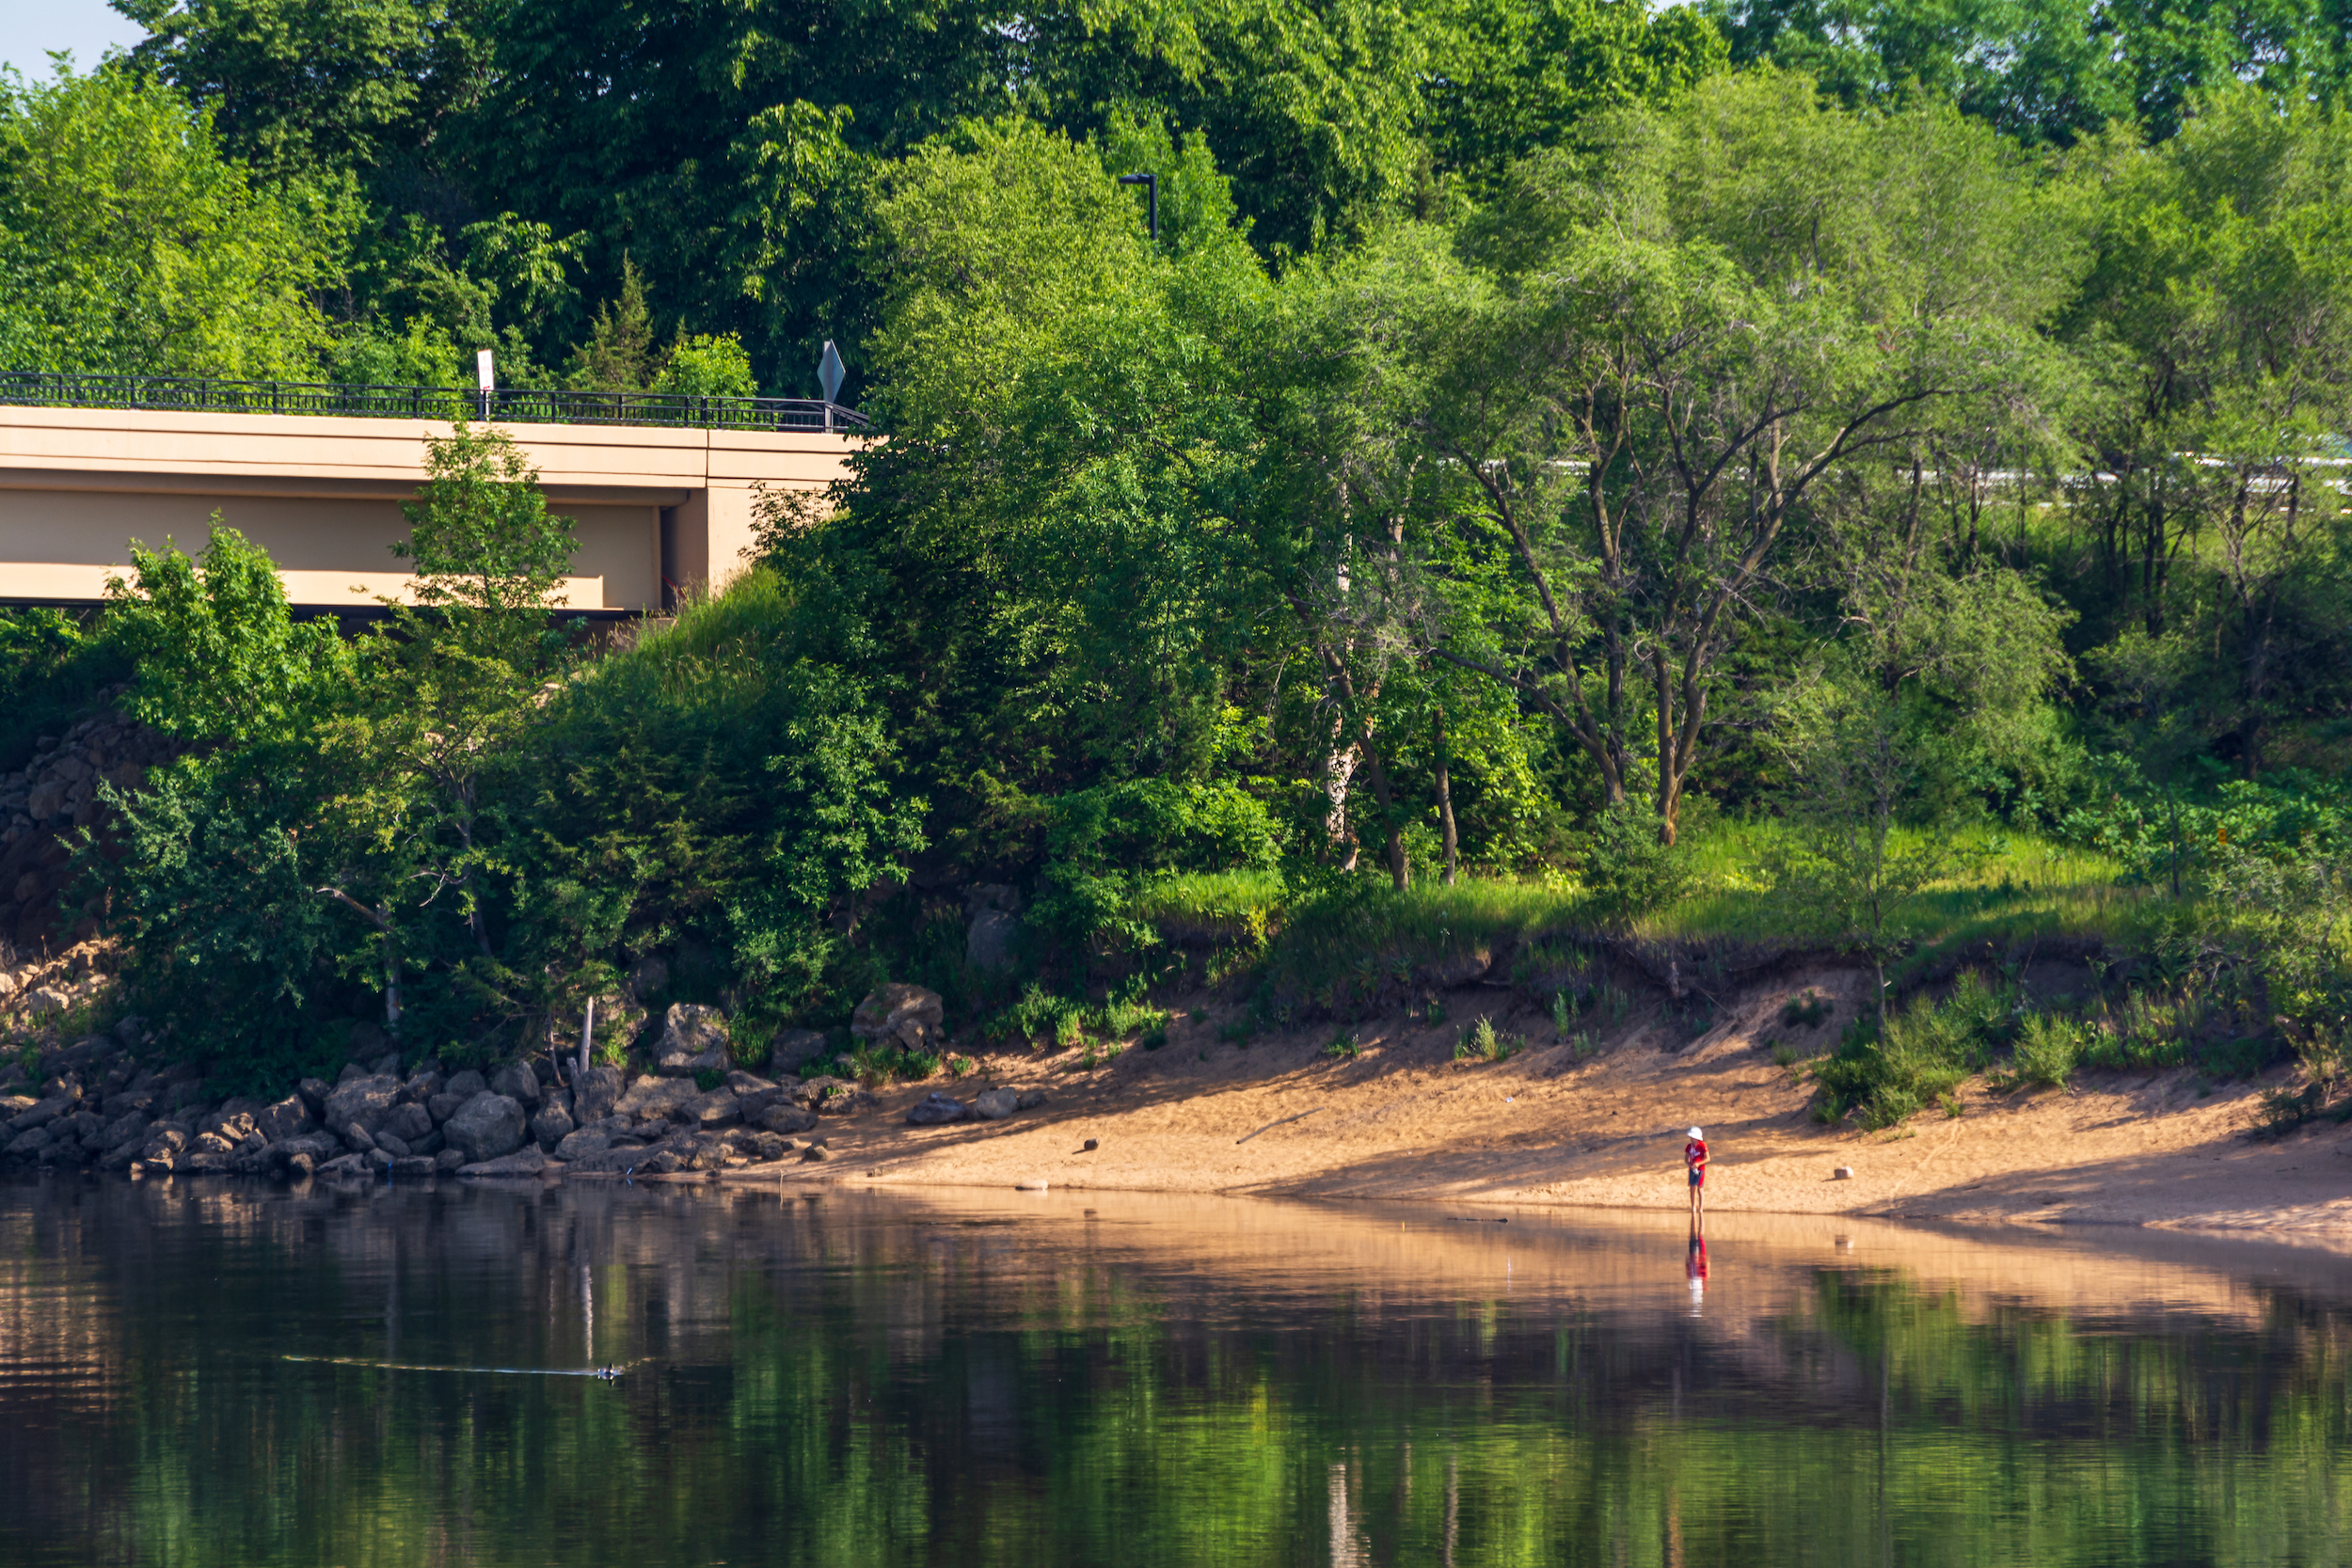 A person fishes from shore along the Wisconsin River in Prairie du Sac, Wis.